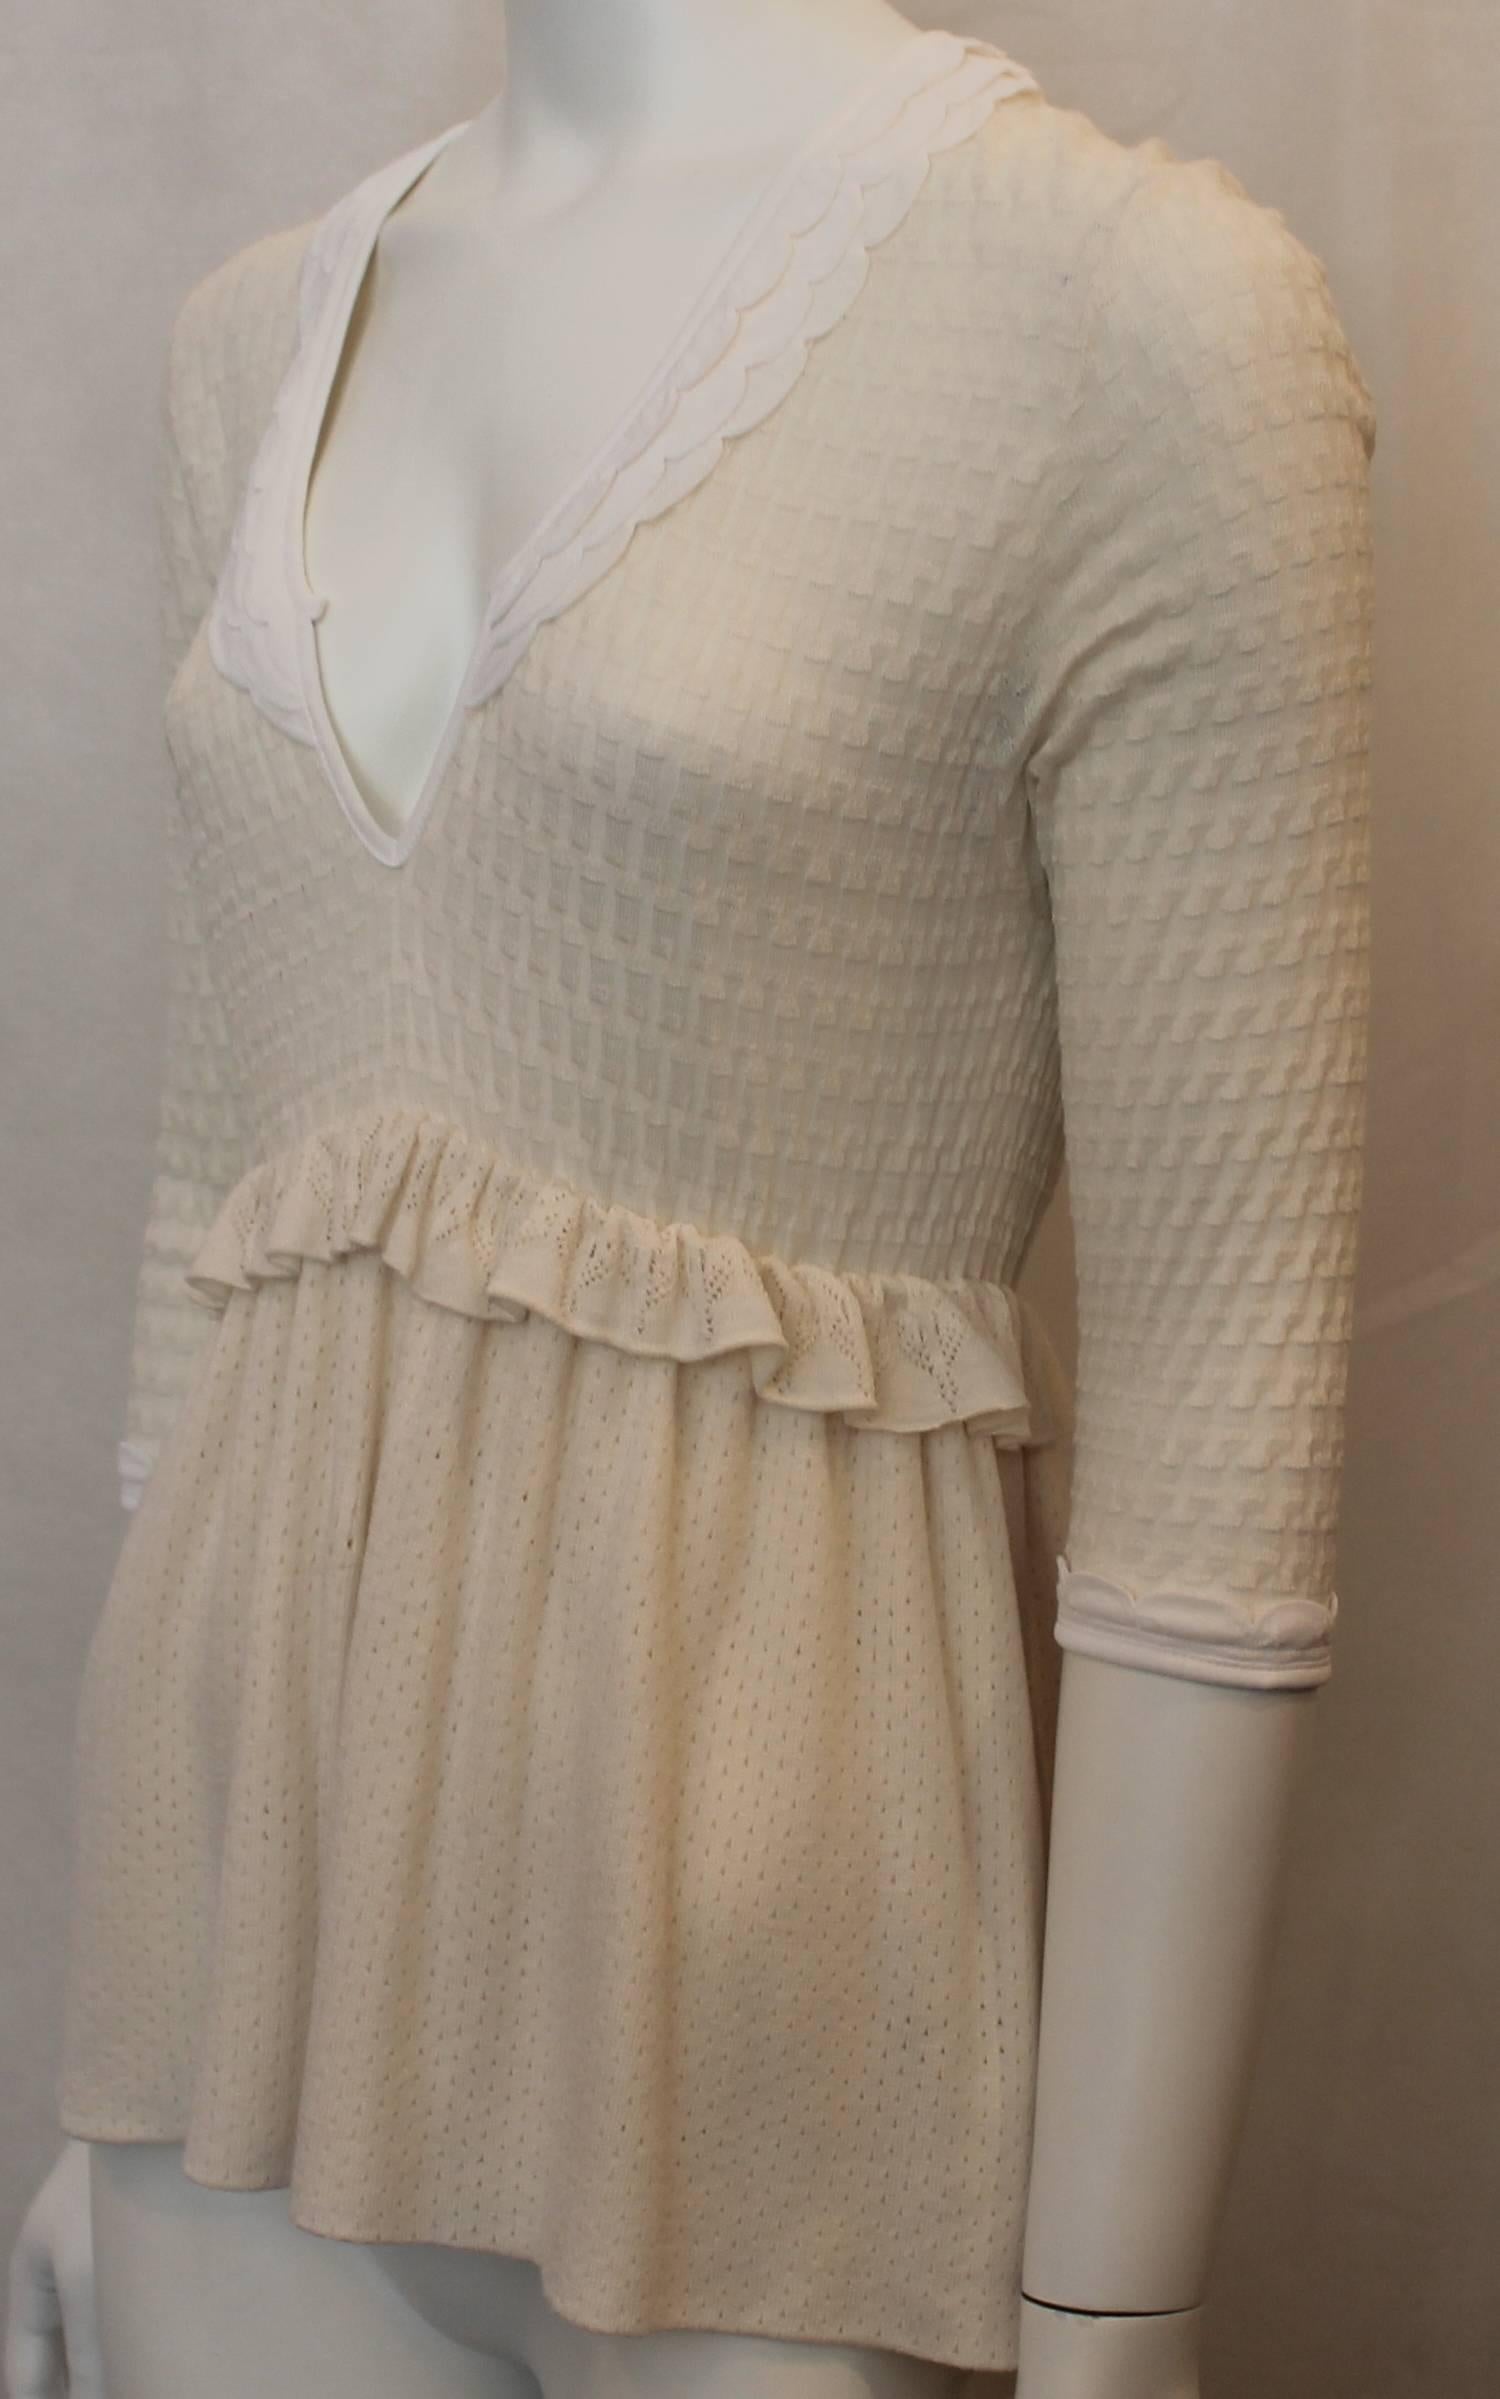 Fendi Ivory & White Knit 3/4 Sleeve Babydoll Top - 44. This top is in excellent condition and features a textured knit fabric with a slight middle ruffle, deep v-neck, and a triple ruffle at the neckline.

Measurements:
Bust- up to 40